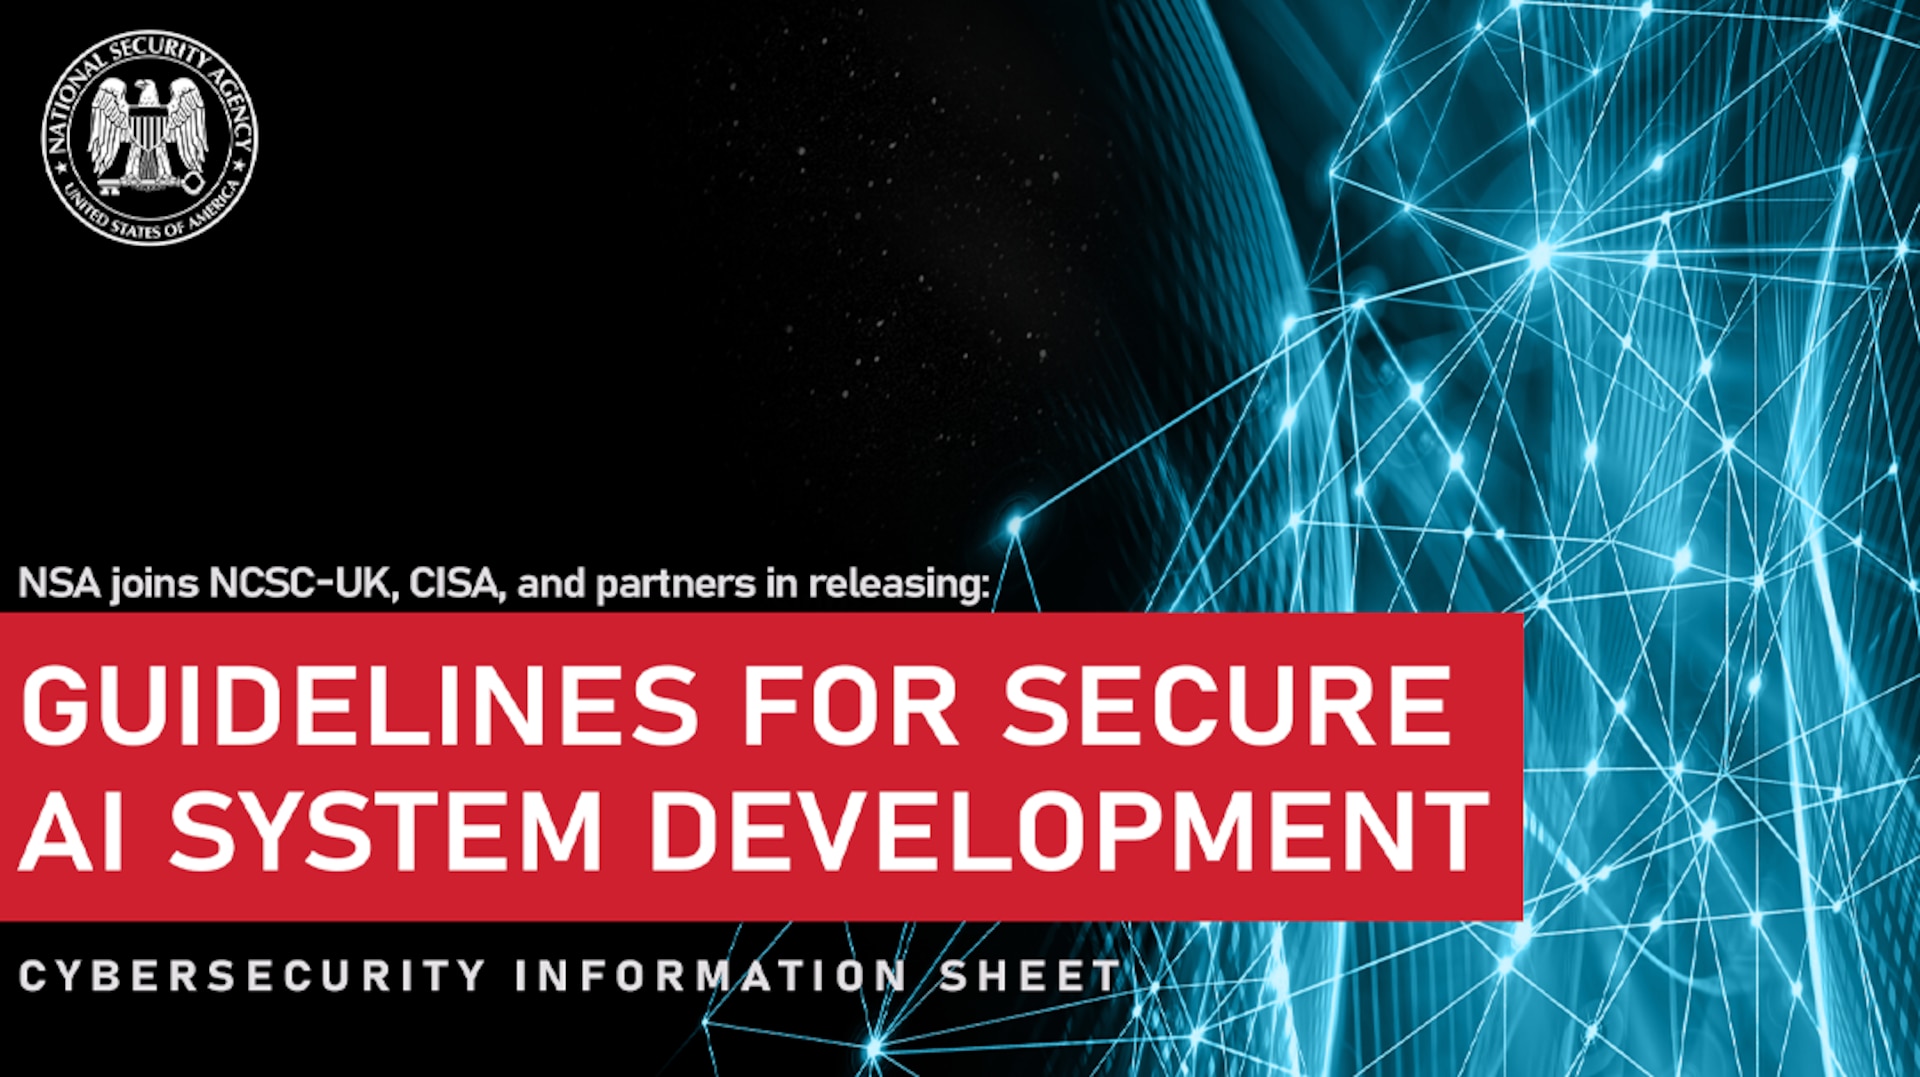 CSI: Guidelines for Secure AI System Development